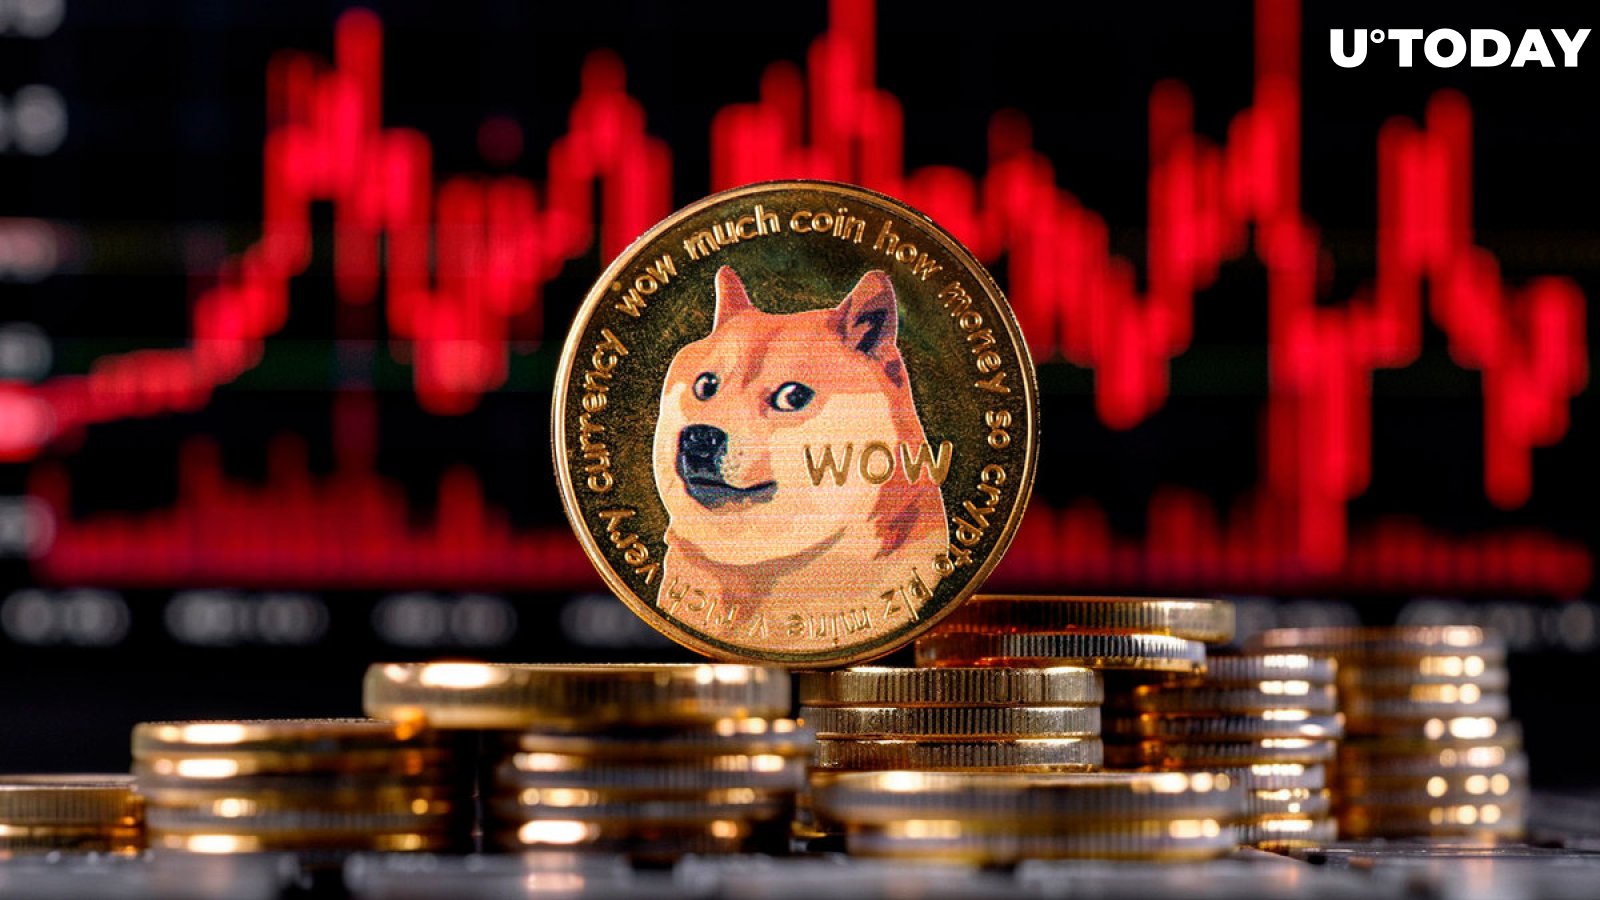 Dogecoin (DOGE) Plunges 92.5% in Key On-Chain Metric, What's Going On?